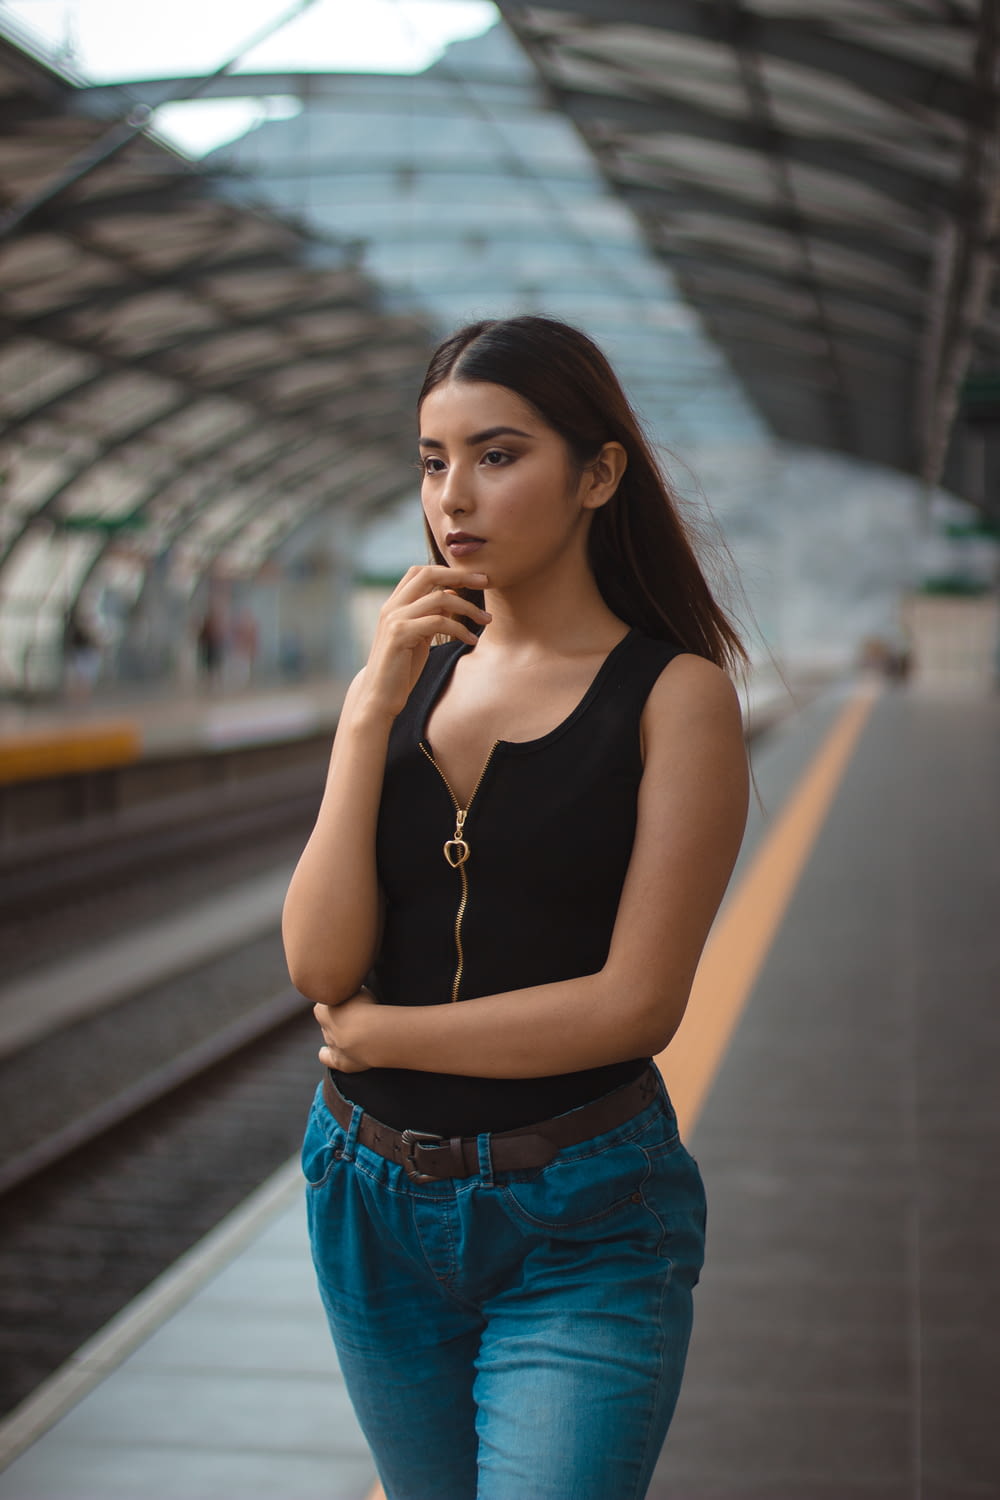 woman standing in train station